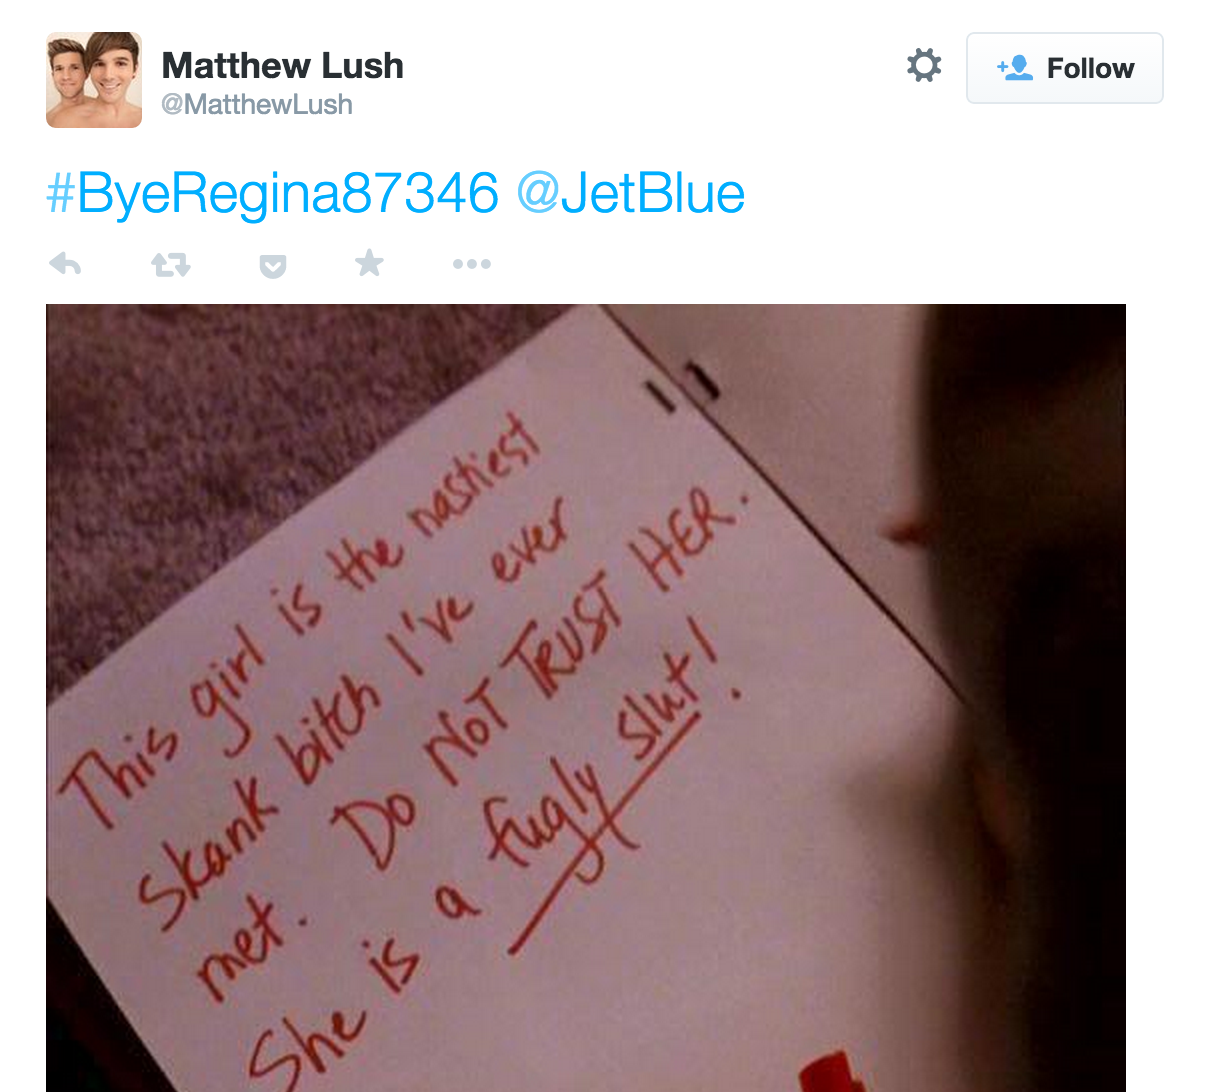 One of the Tweets that ultimately led to JetBlue refusing to allow the passenger to board.